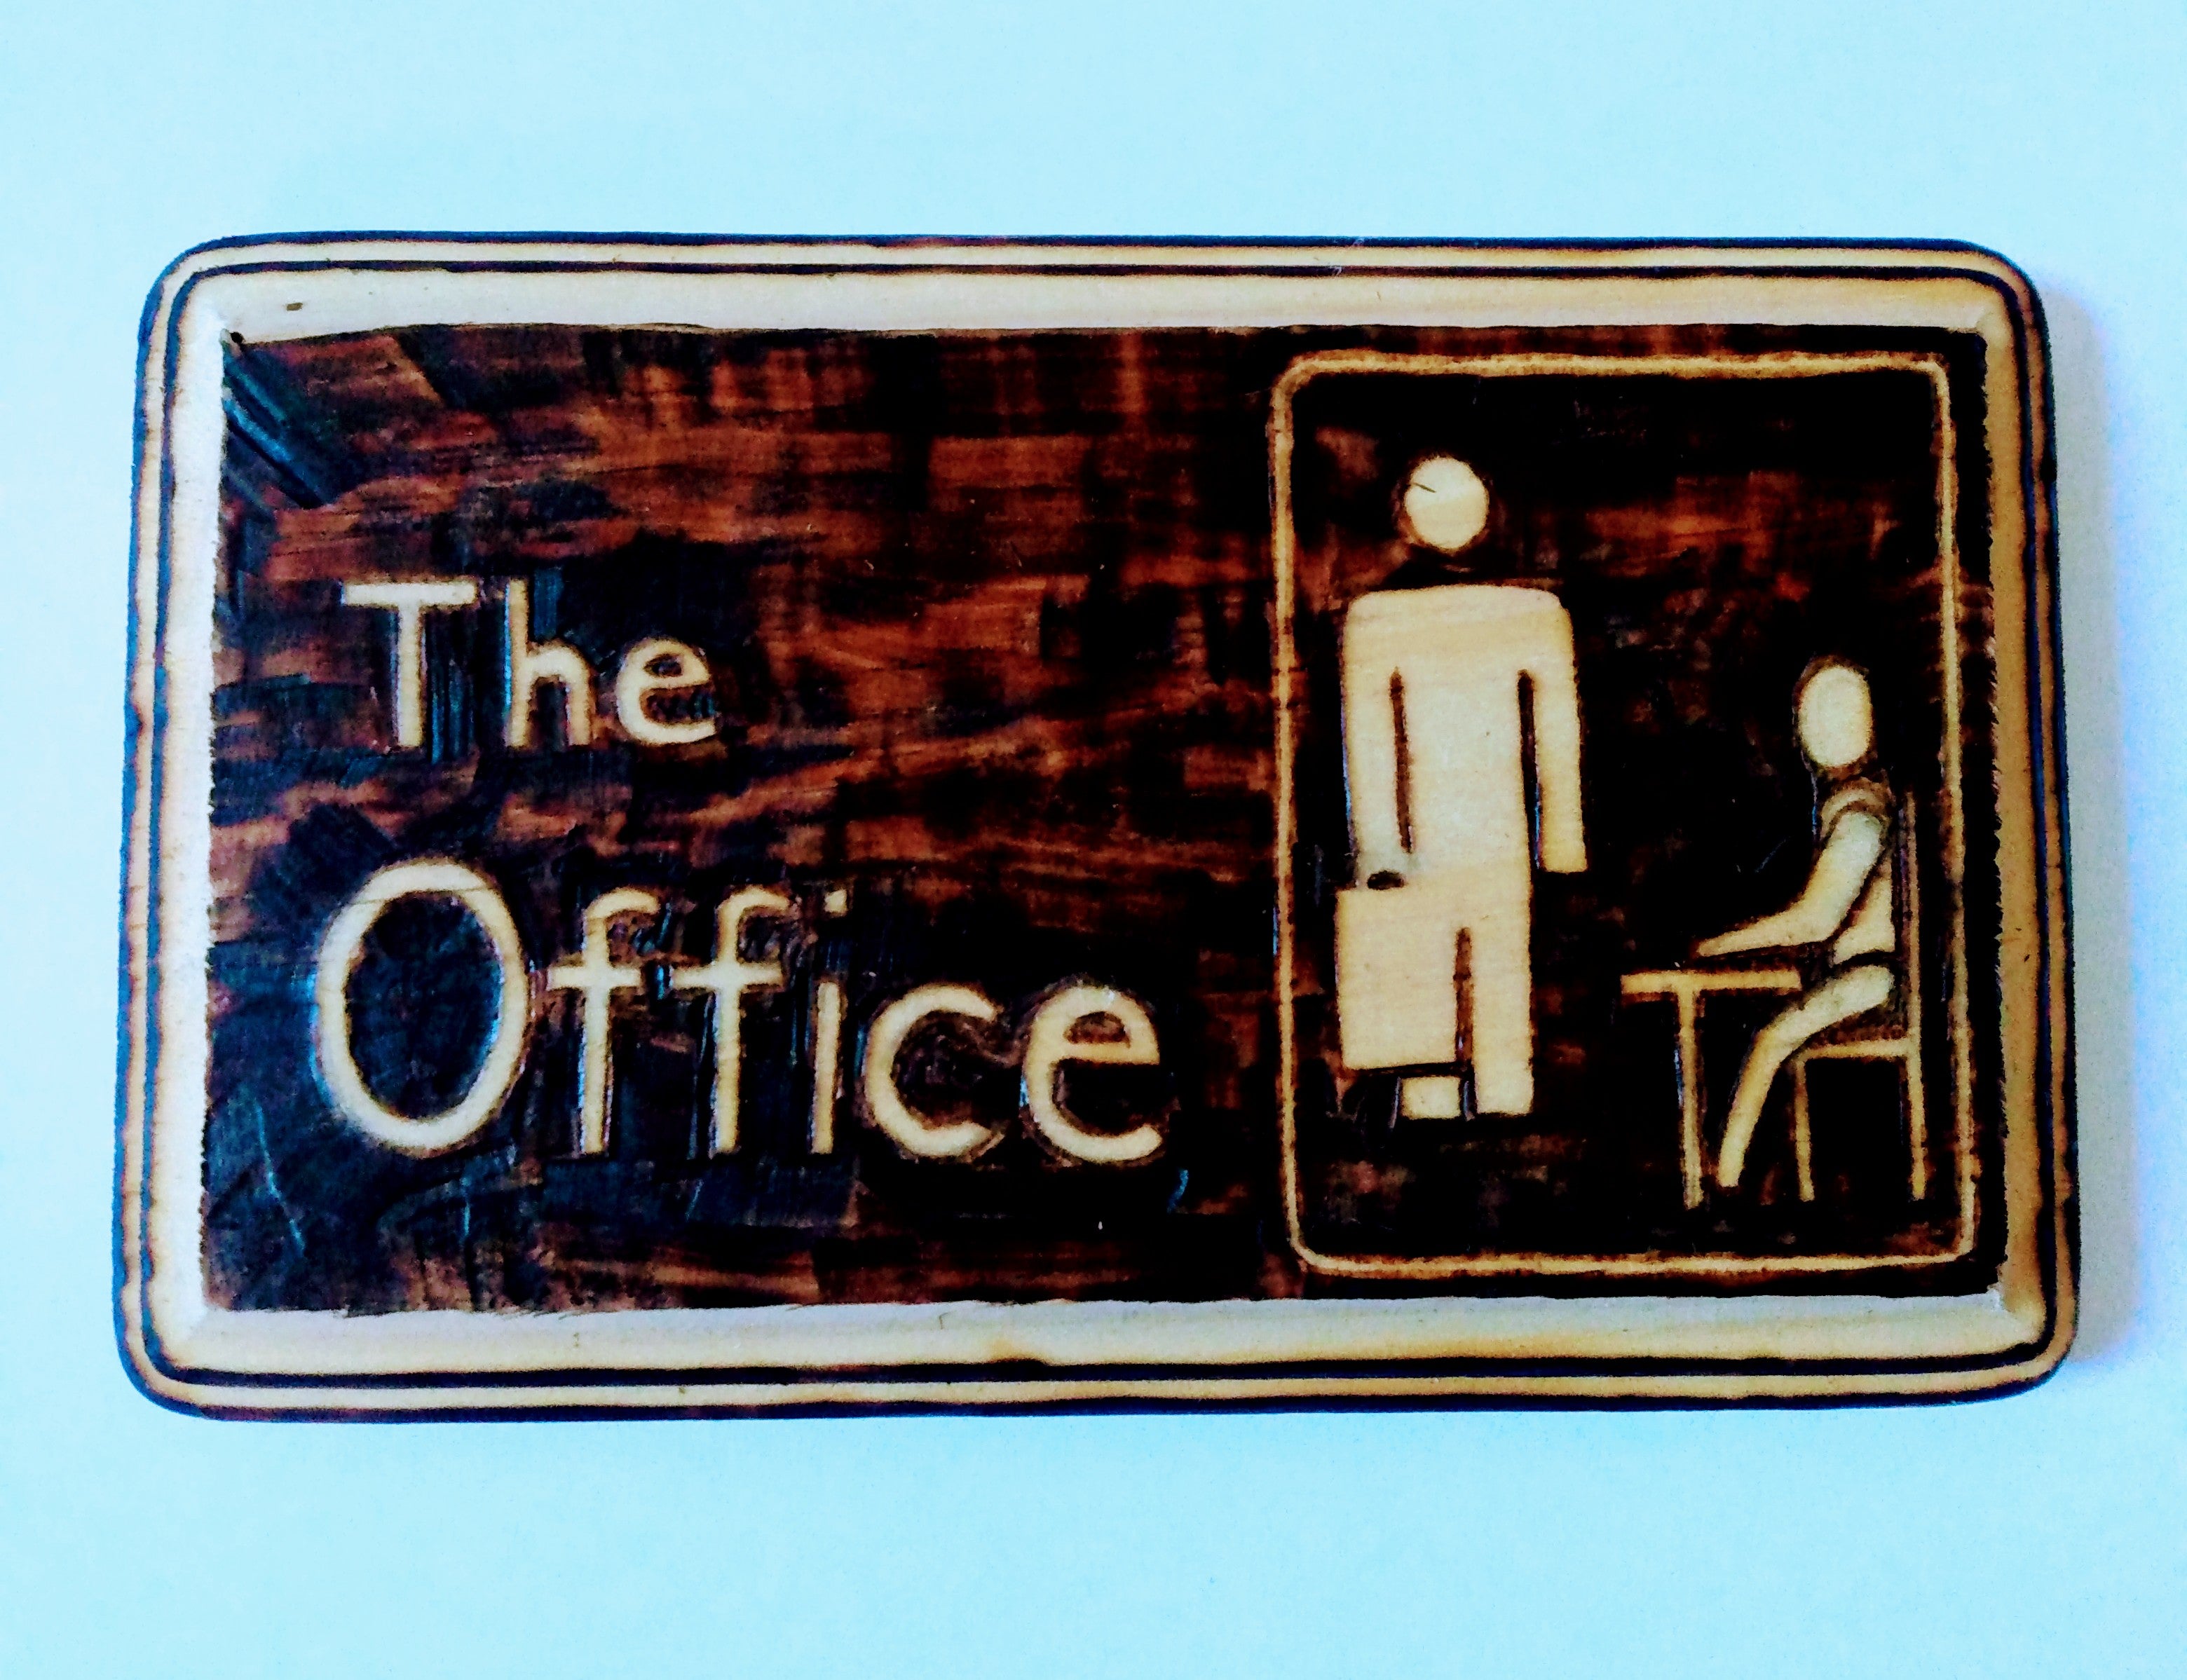 The Office Plaque